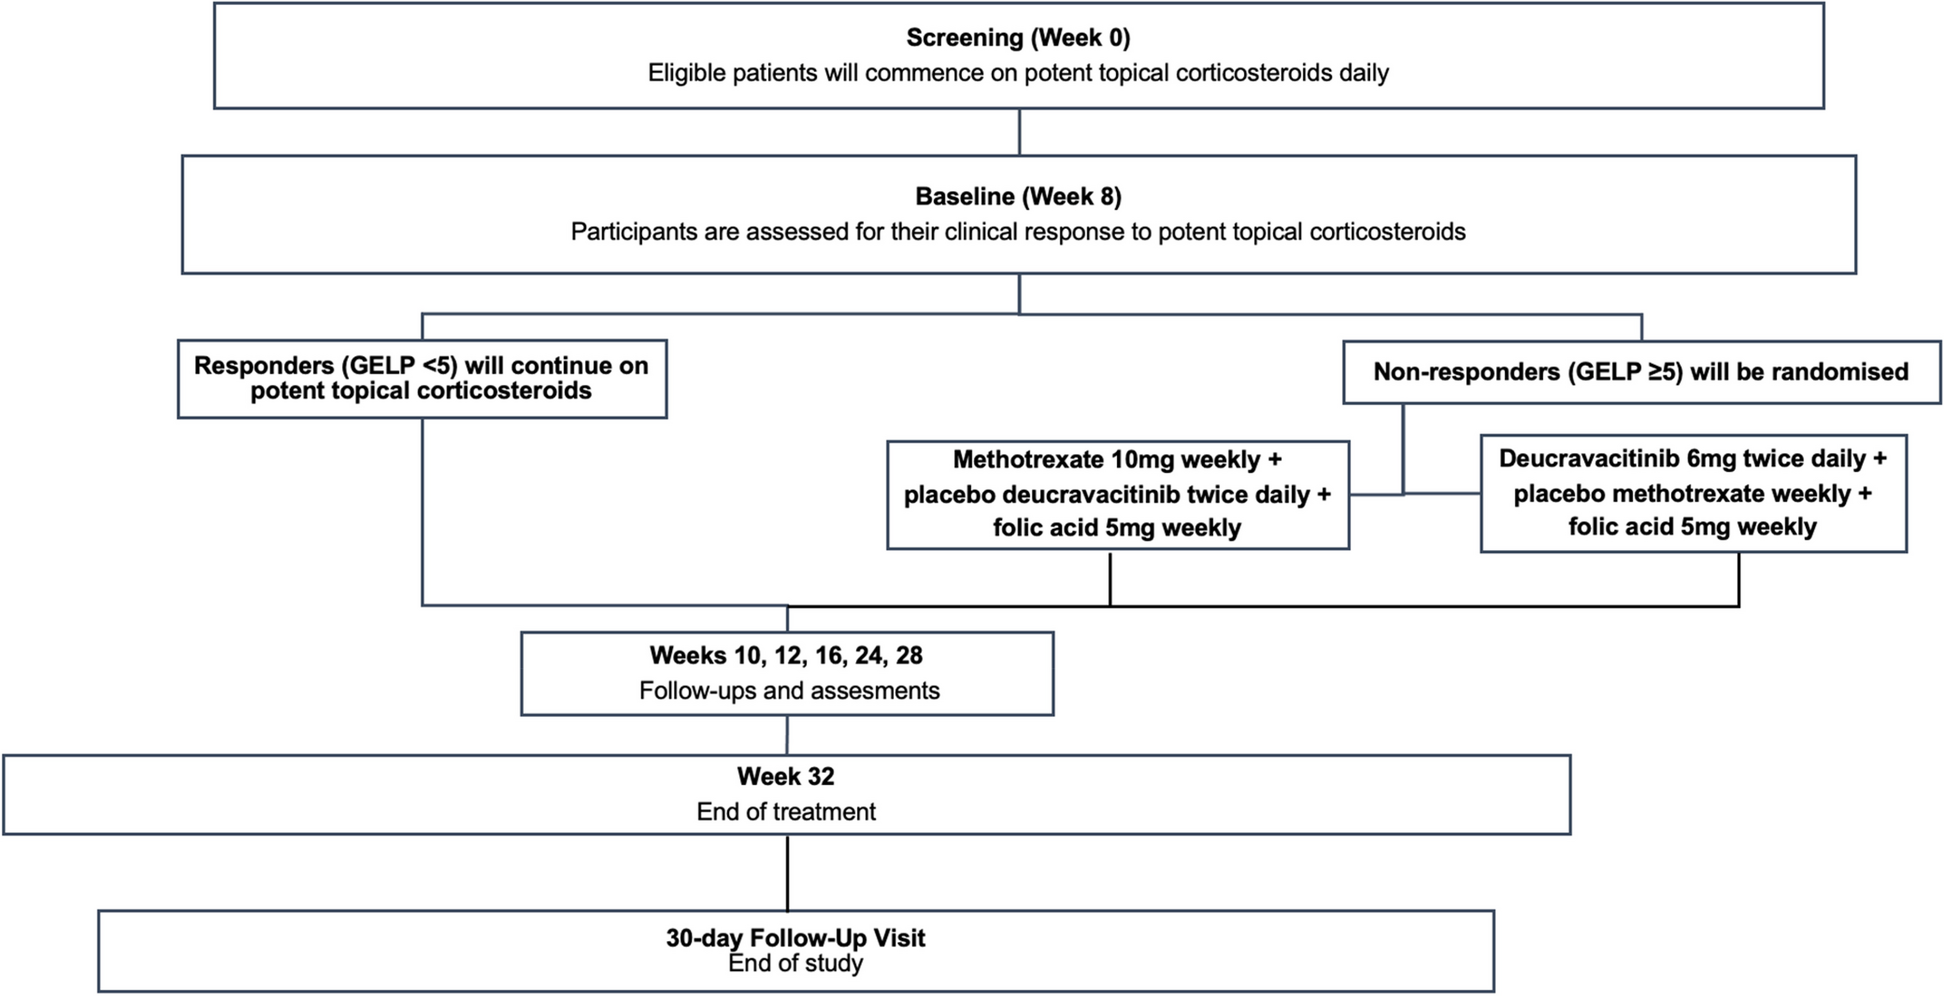 The efficacy and safety of deucravacitinib compared to methotrexate, in patients with vulvar lichen planus who have failed topical therapy with potent corticosteroids: a study protocol for a single-centre double-blinded randomised controlled trial